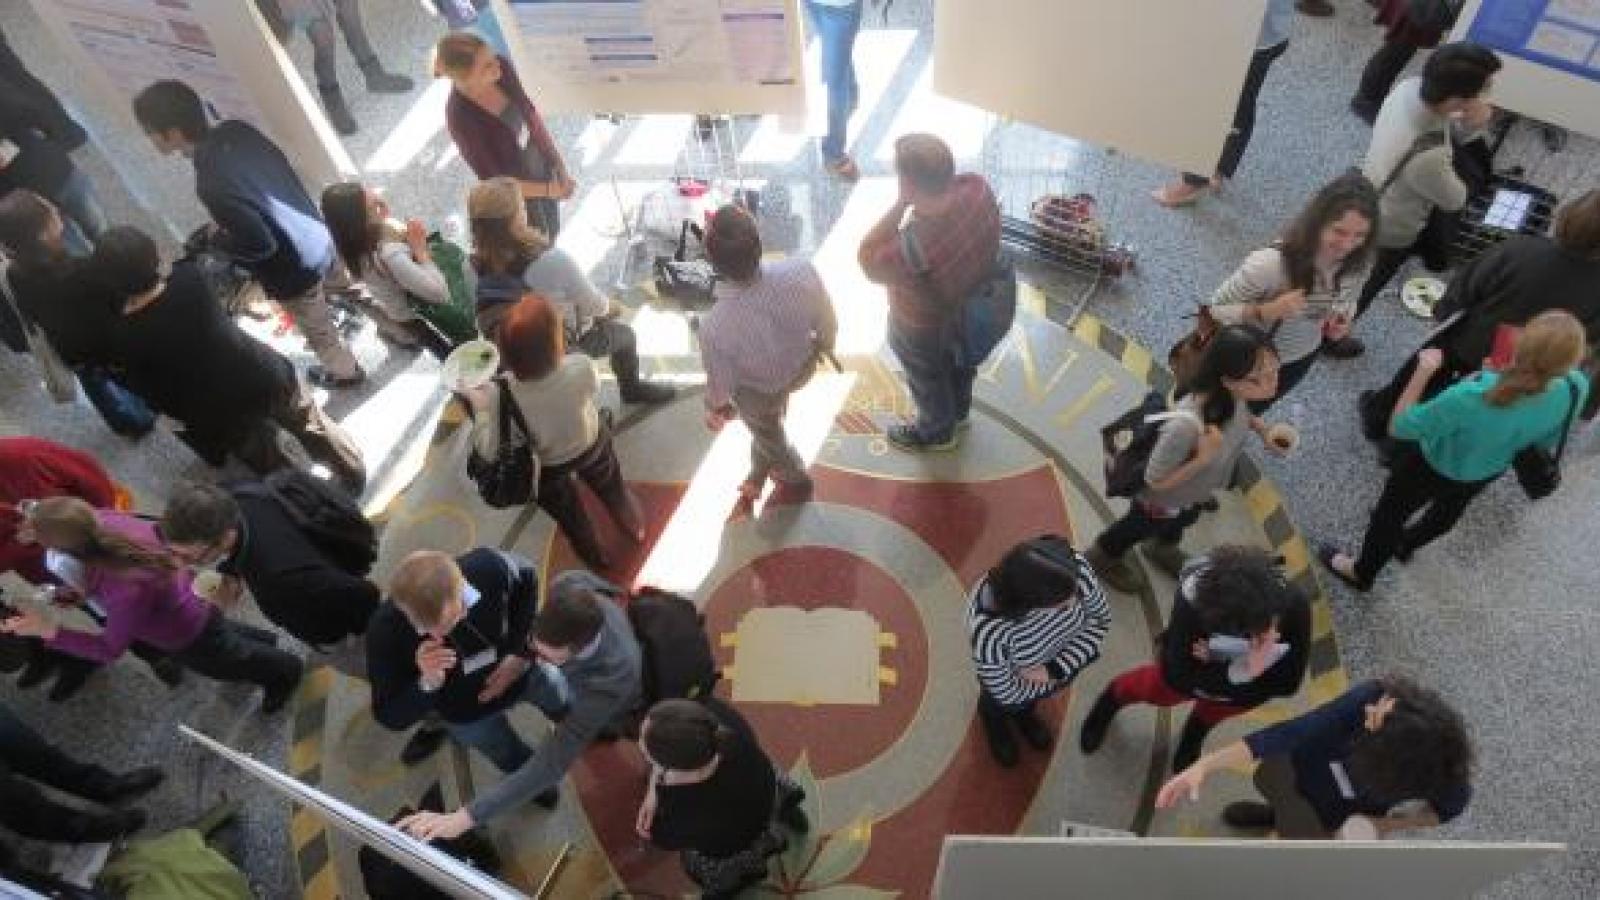 Top view of poster session in Mershon lobby